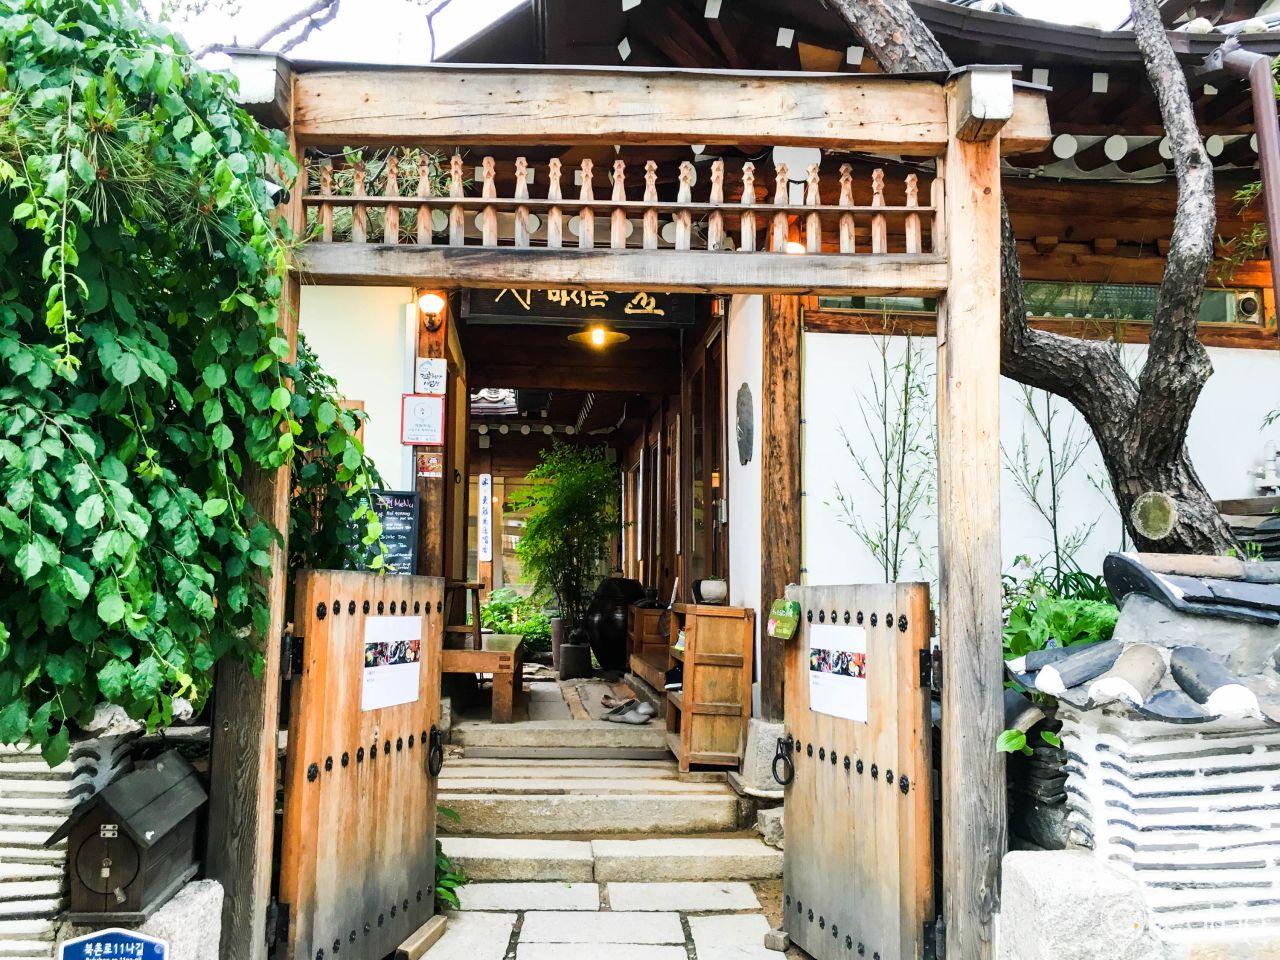 Outdoor seating area surrounded by lush greenery and wood building with open door in Korea.